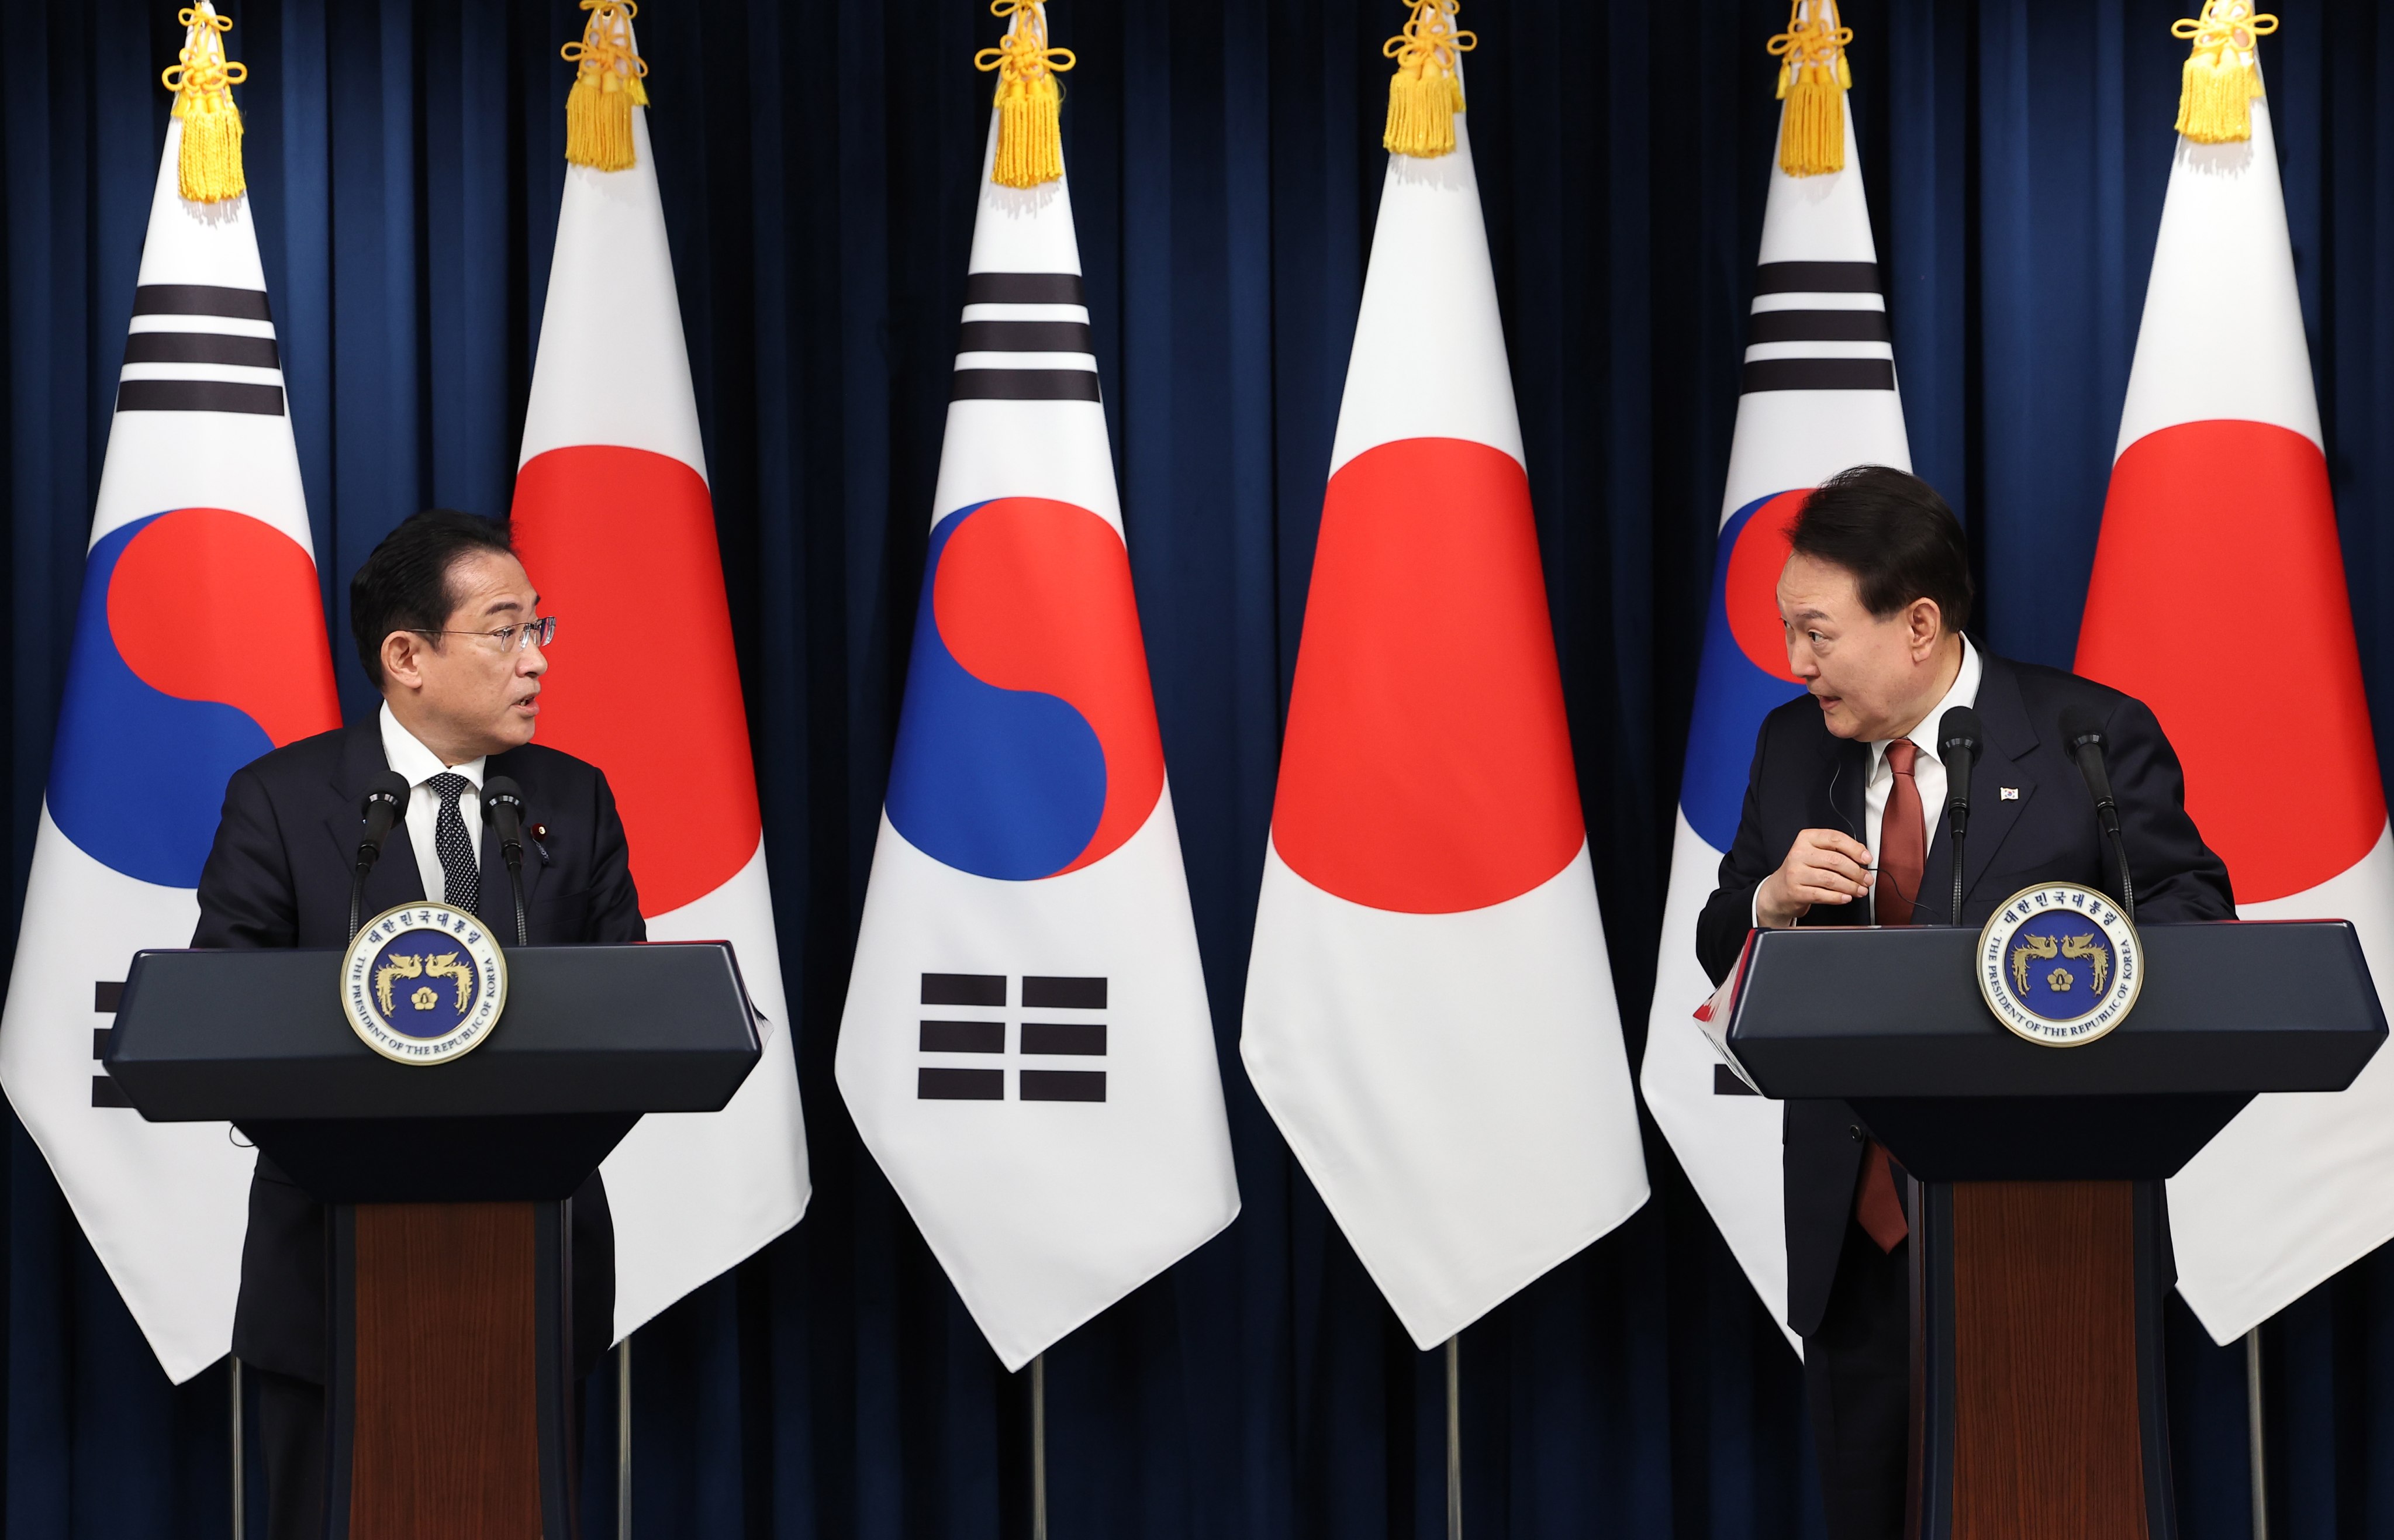 Japanese Prime Minister Fumio Kishida (left) and South Korean President Yoon Suk-yeol attend a joint press conference after their talks at the presidential office in Seoul, South Korea, on May 7. Kishida was in South Korea for a two-day visit to strengthen ties. Photo: EPA-EFE